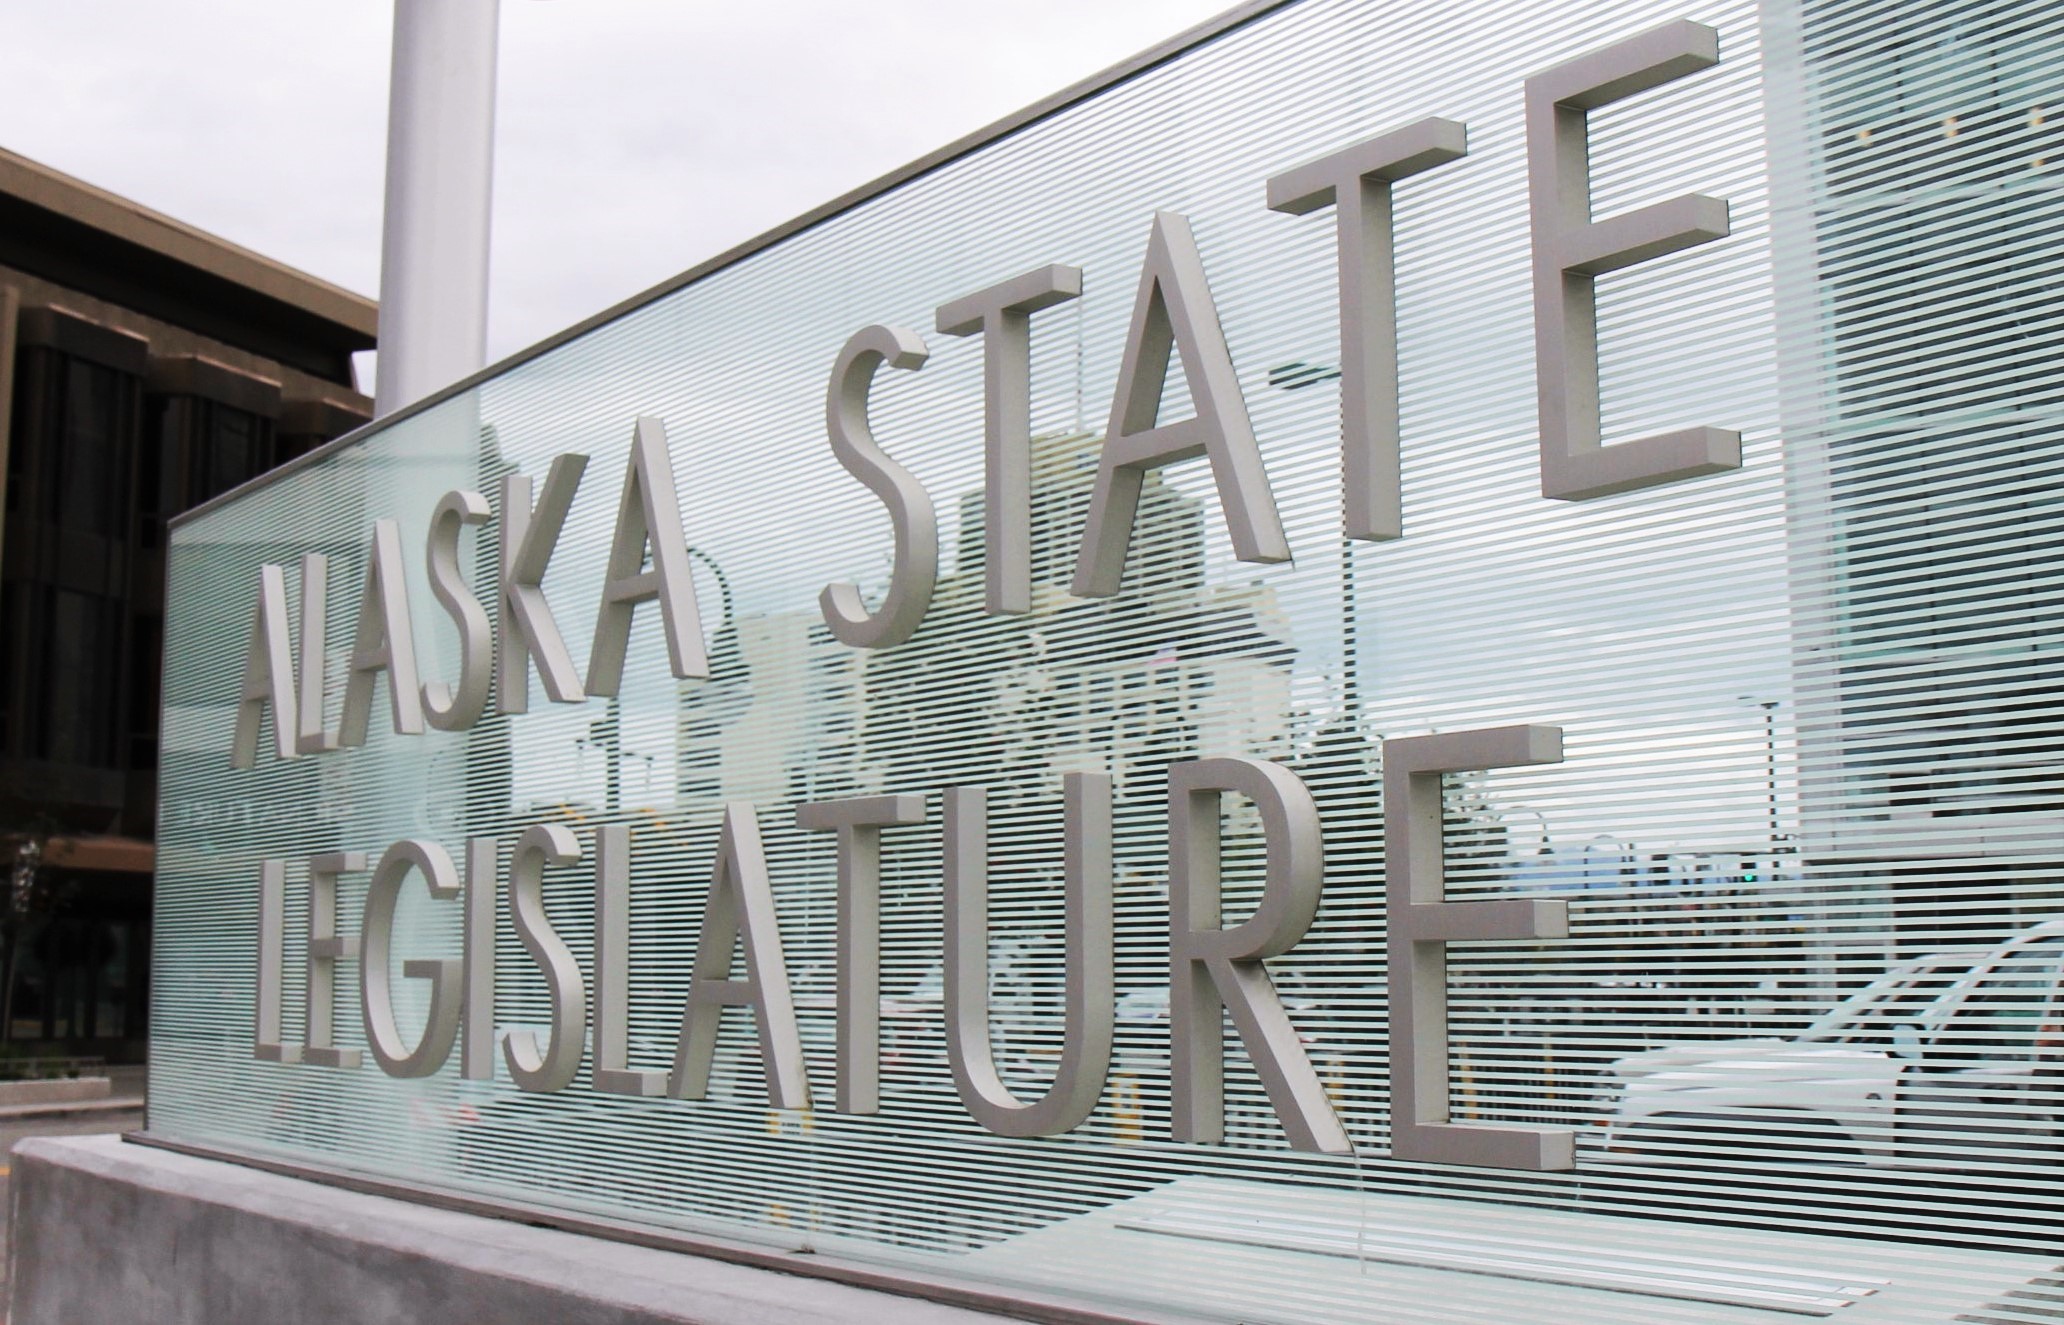 The Alaska State Legislature sign at the Legislative Information Office in Downtown Anchorage.